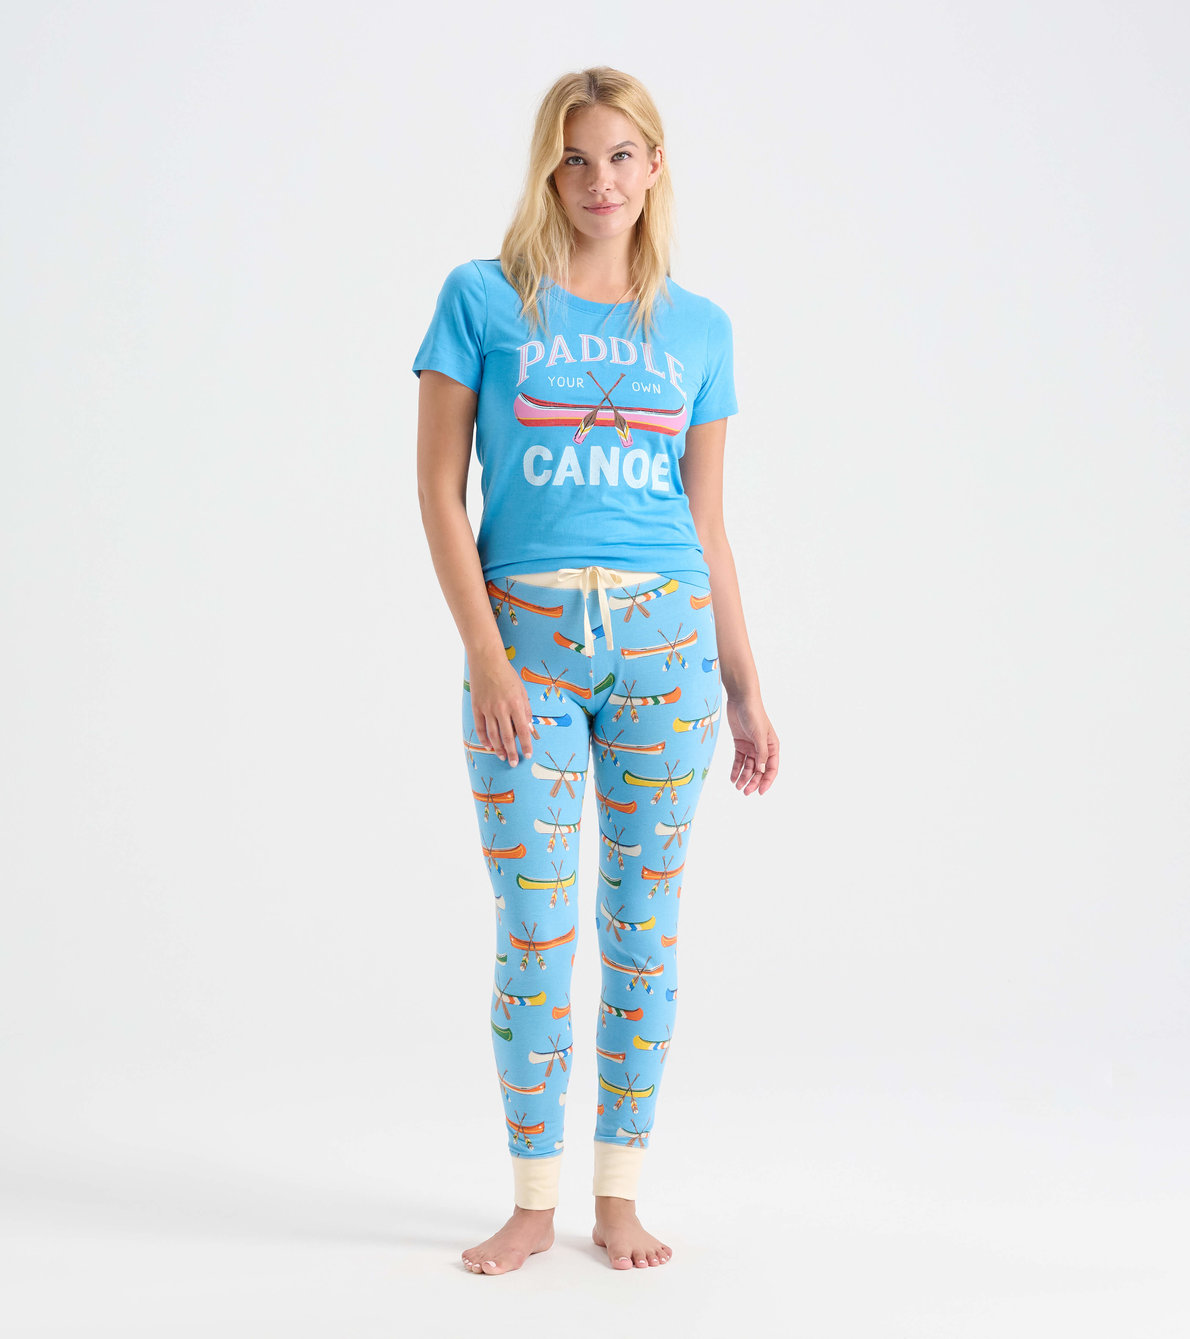 View larger image of Women's Paddle Your Own Canoe T-Shirt and Leggings Pajama Separates